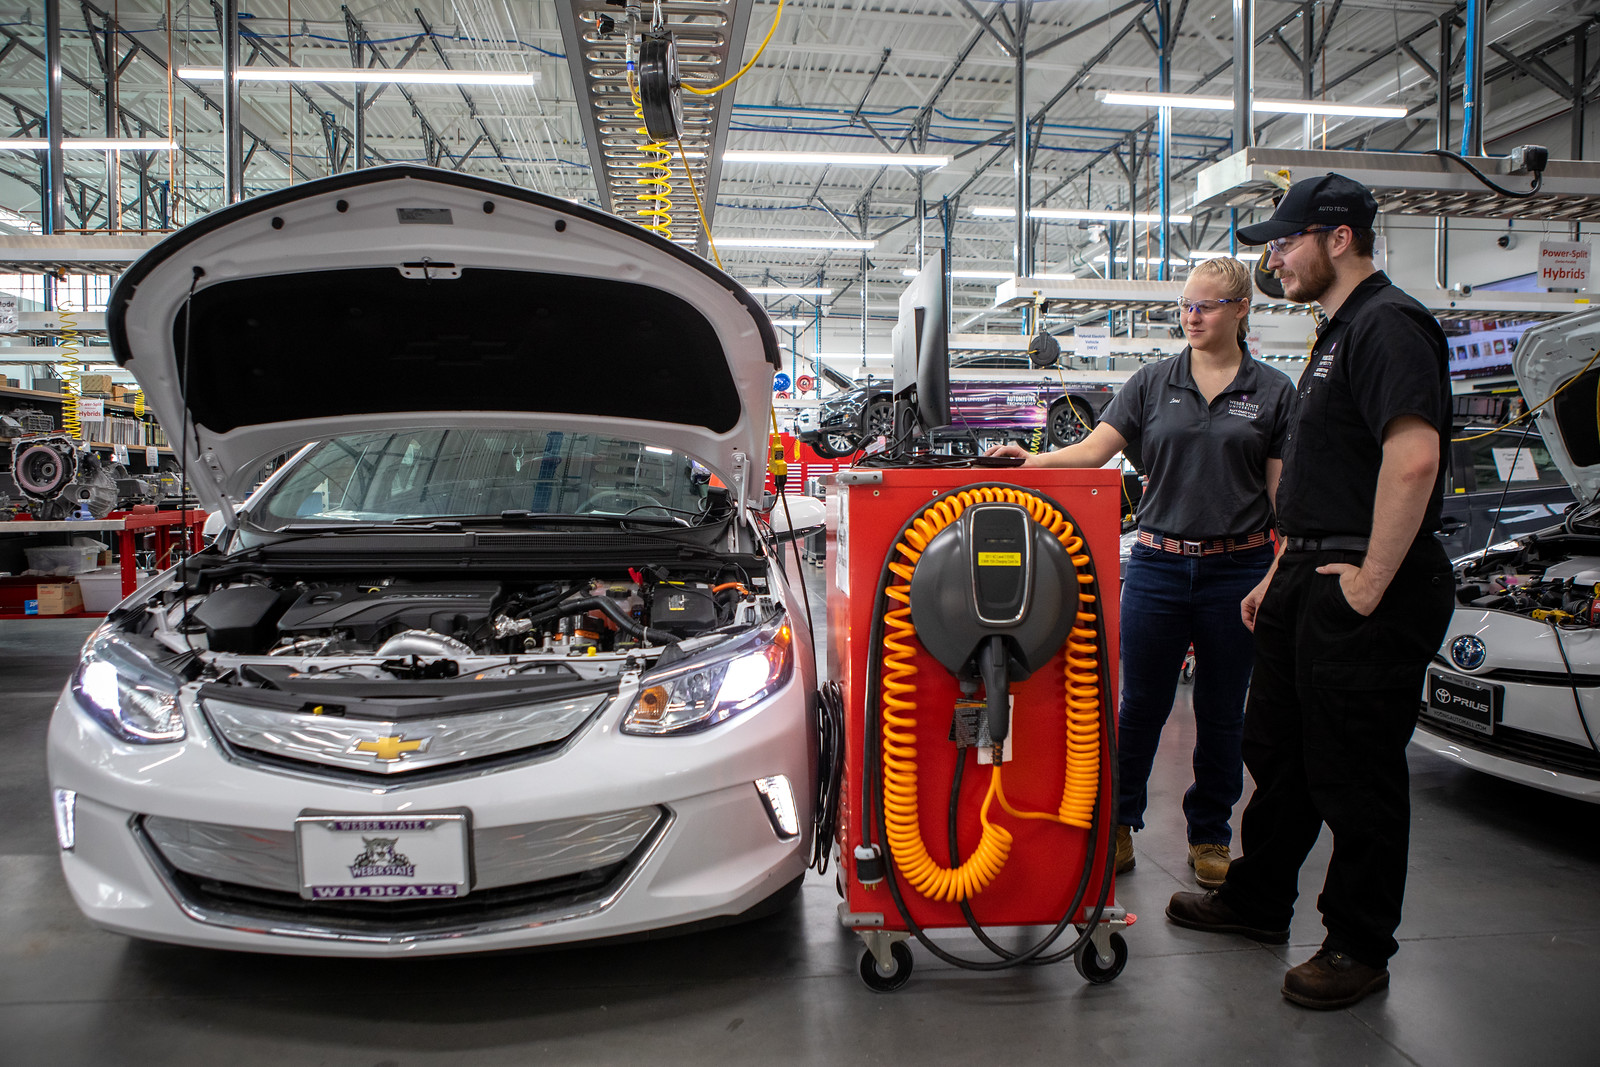 Students in Weber State Universitys Department of Automotive Technology work on hybrid and electric vehicles in the Computer & Automotive Engineering Building on the WSU Davis Campus on August 19, 2021.